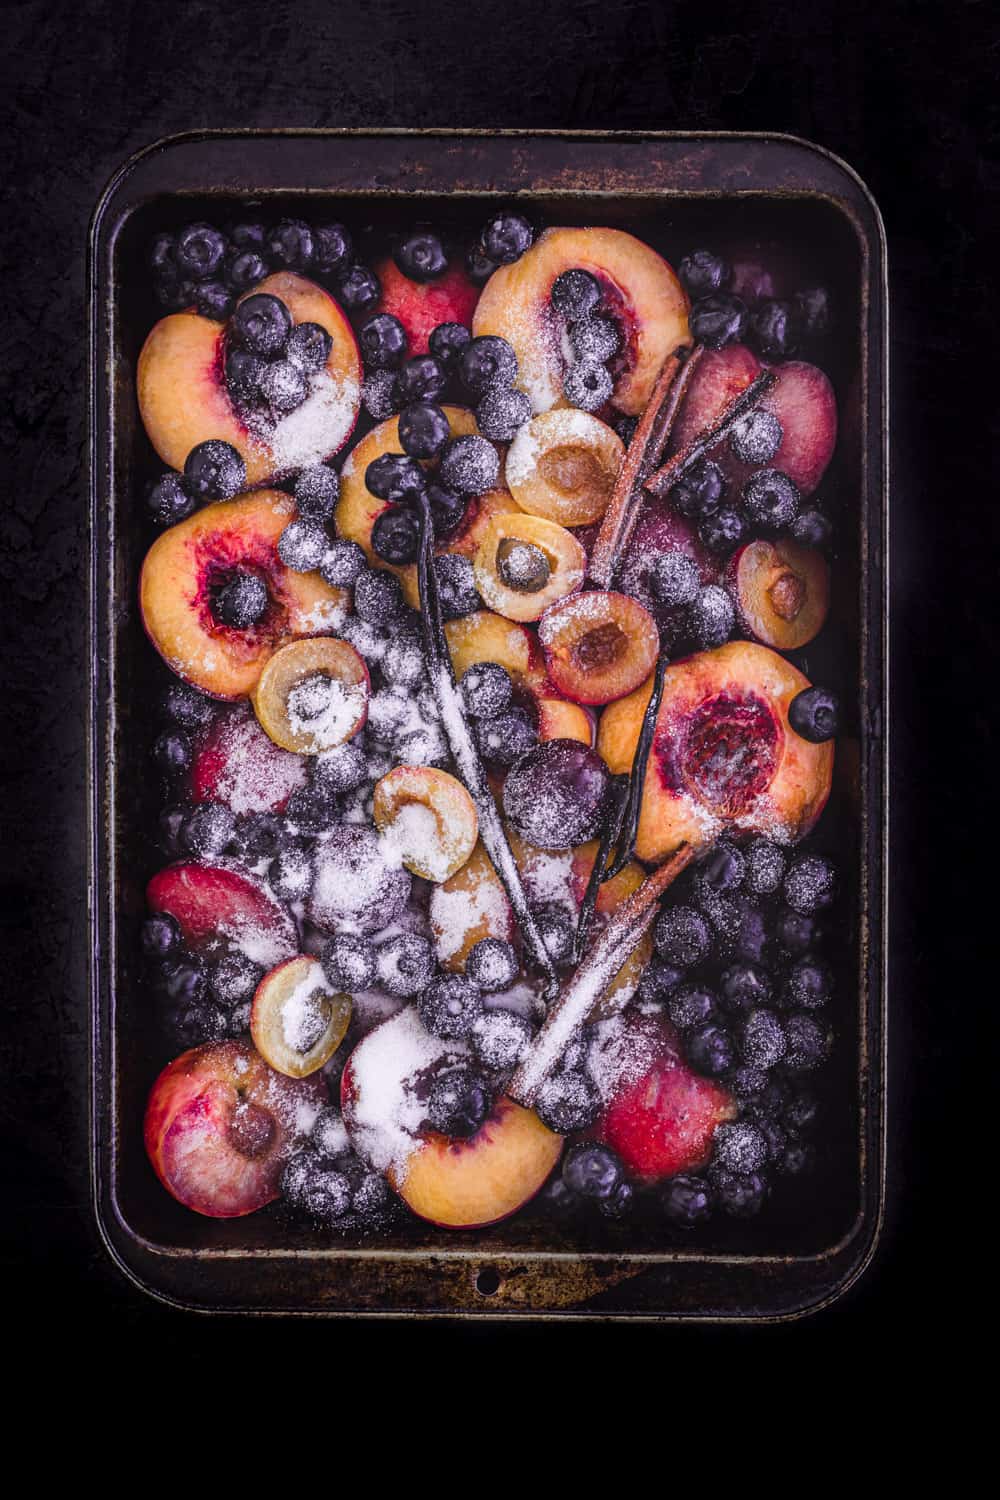 Peaches and other stone fruit in baking tray, sprinkled with sugar and other ingredients; ready to be baked.